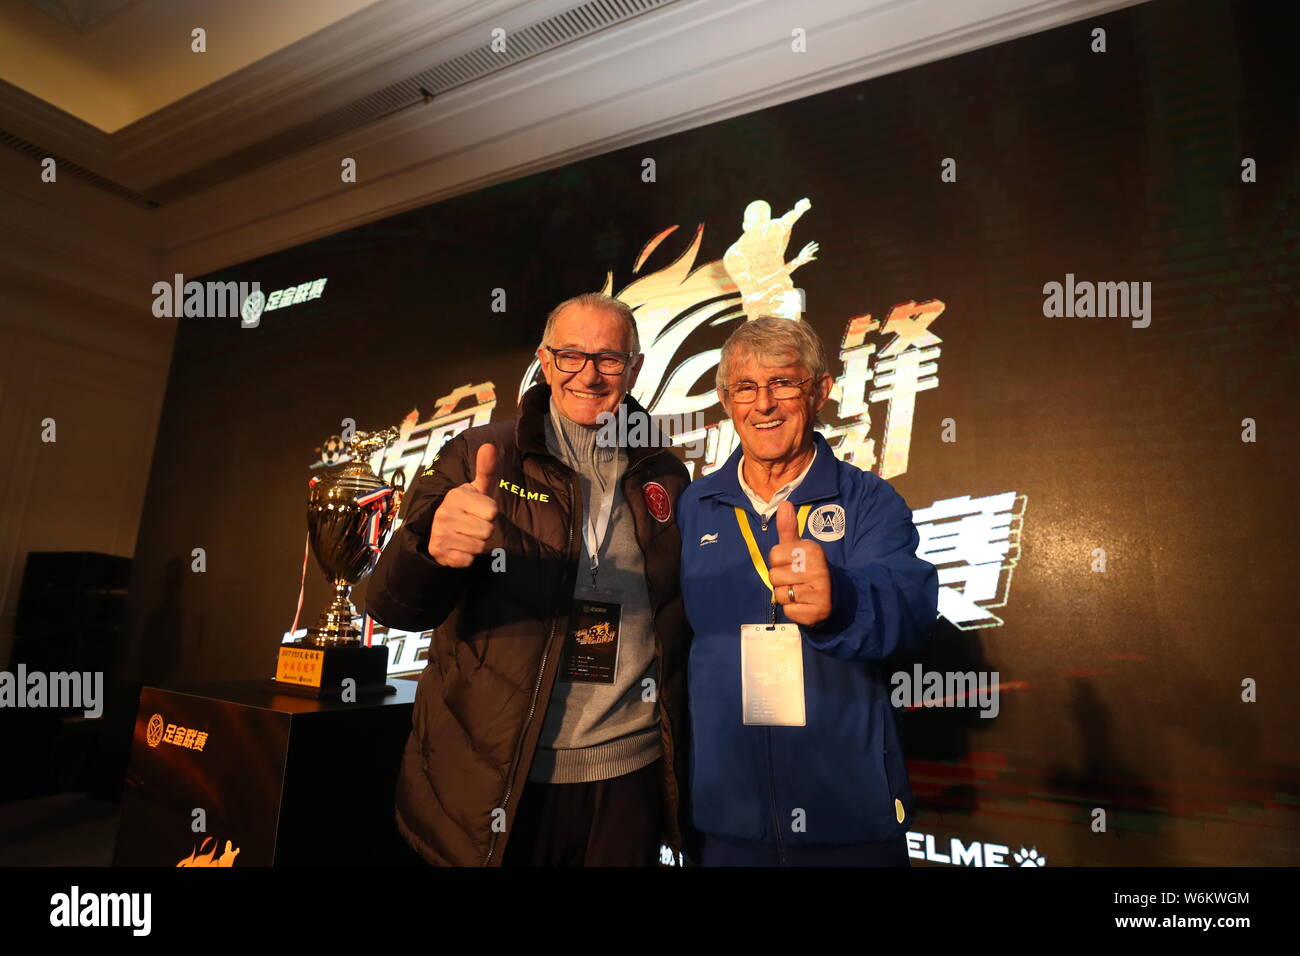 Serbian football coach and former player Bora Milutinovic, right, attends a press conference of Sina 5v5 Football Golden League Finals in Chengdu city Stock Photo